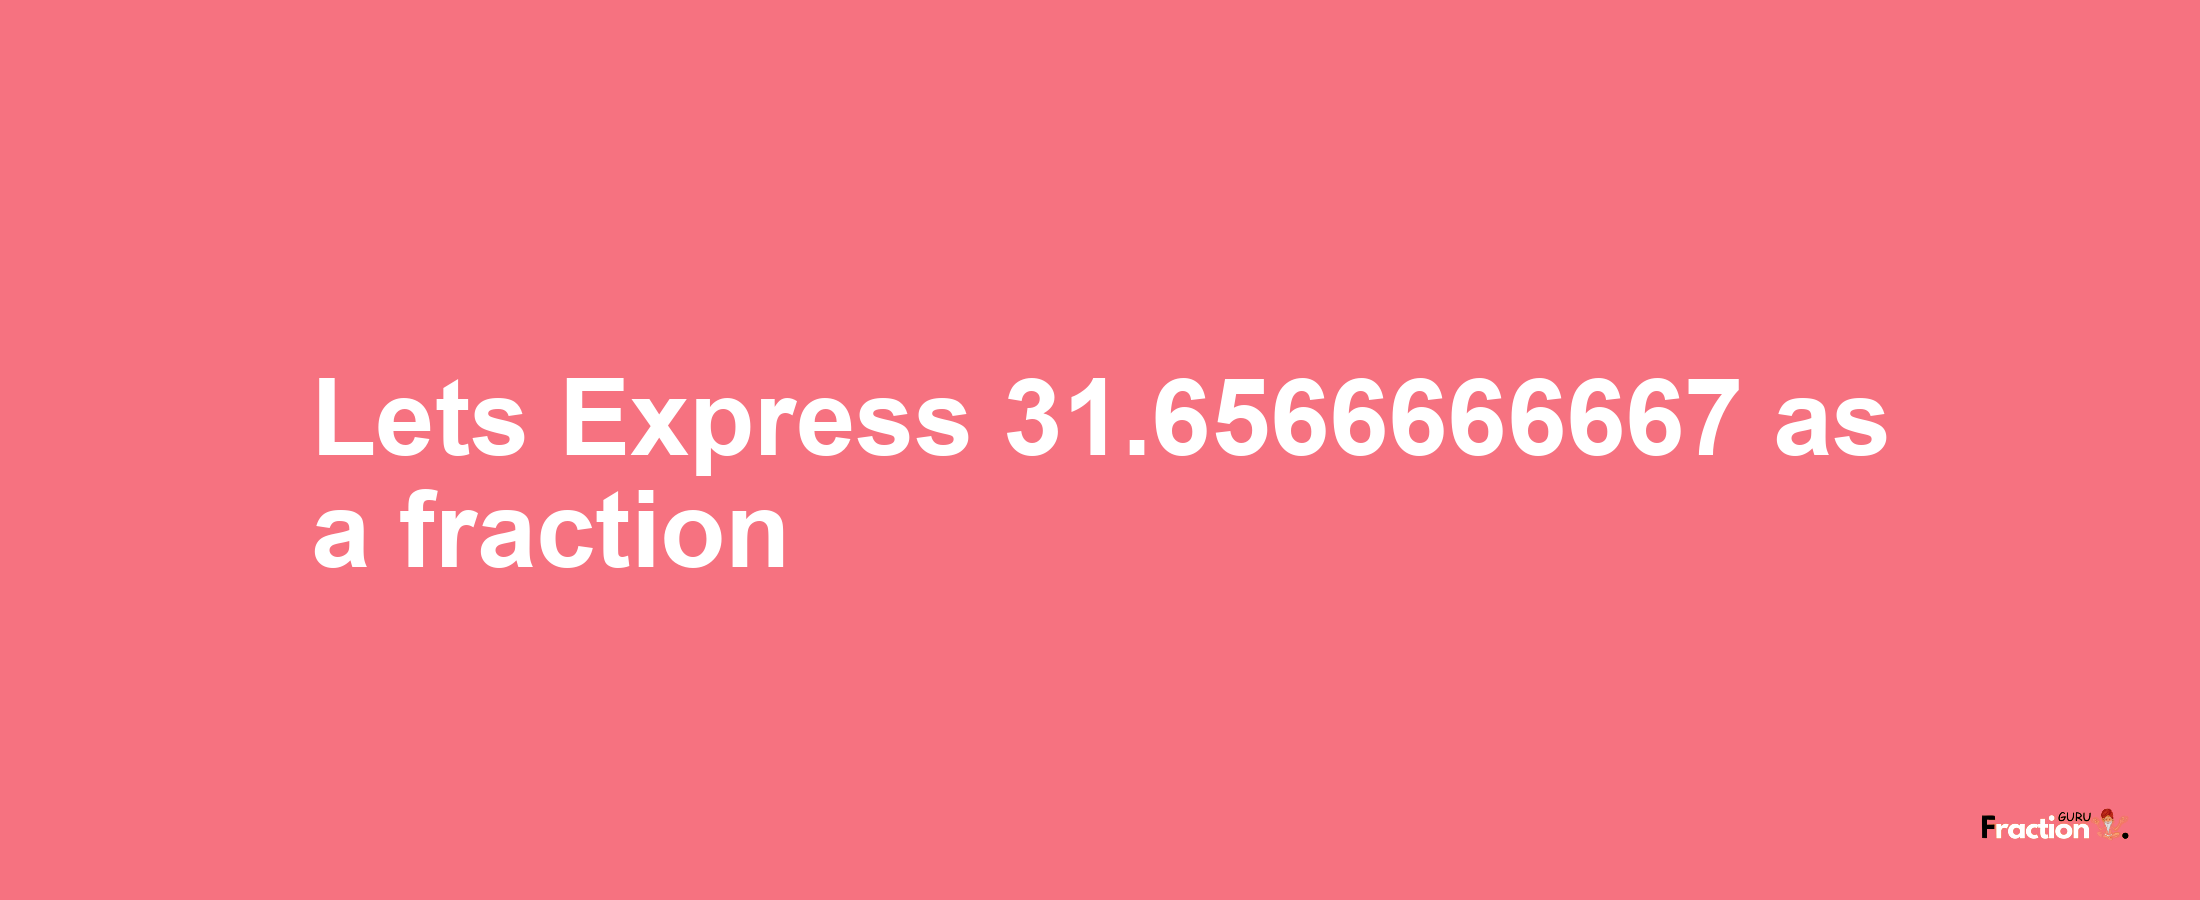 Lets Express 31.6566666667 as afraction